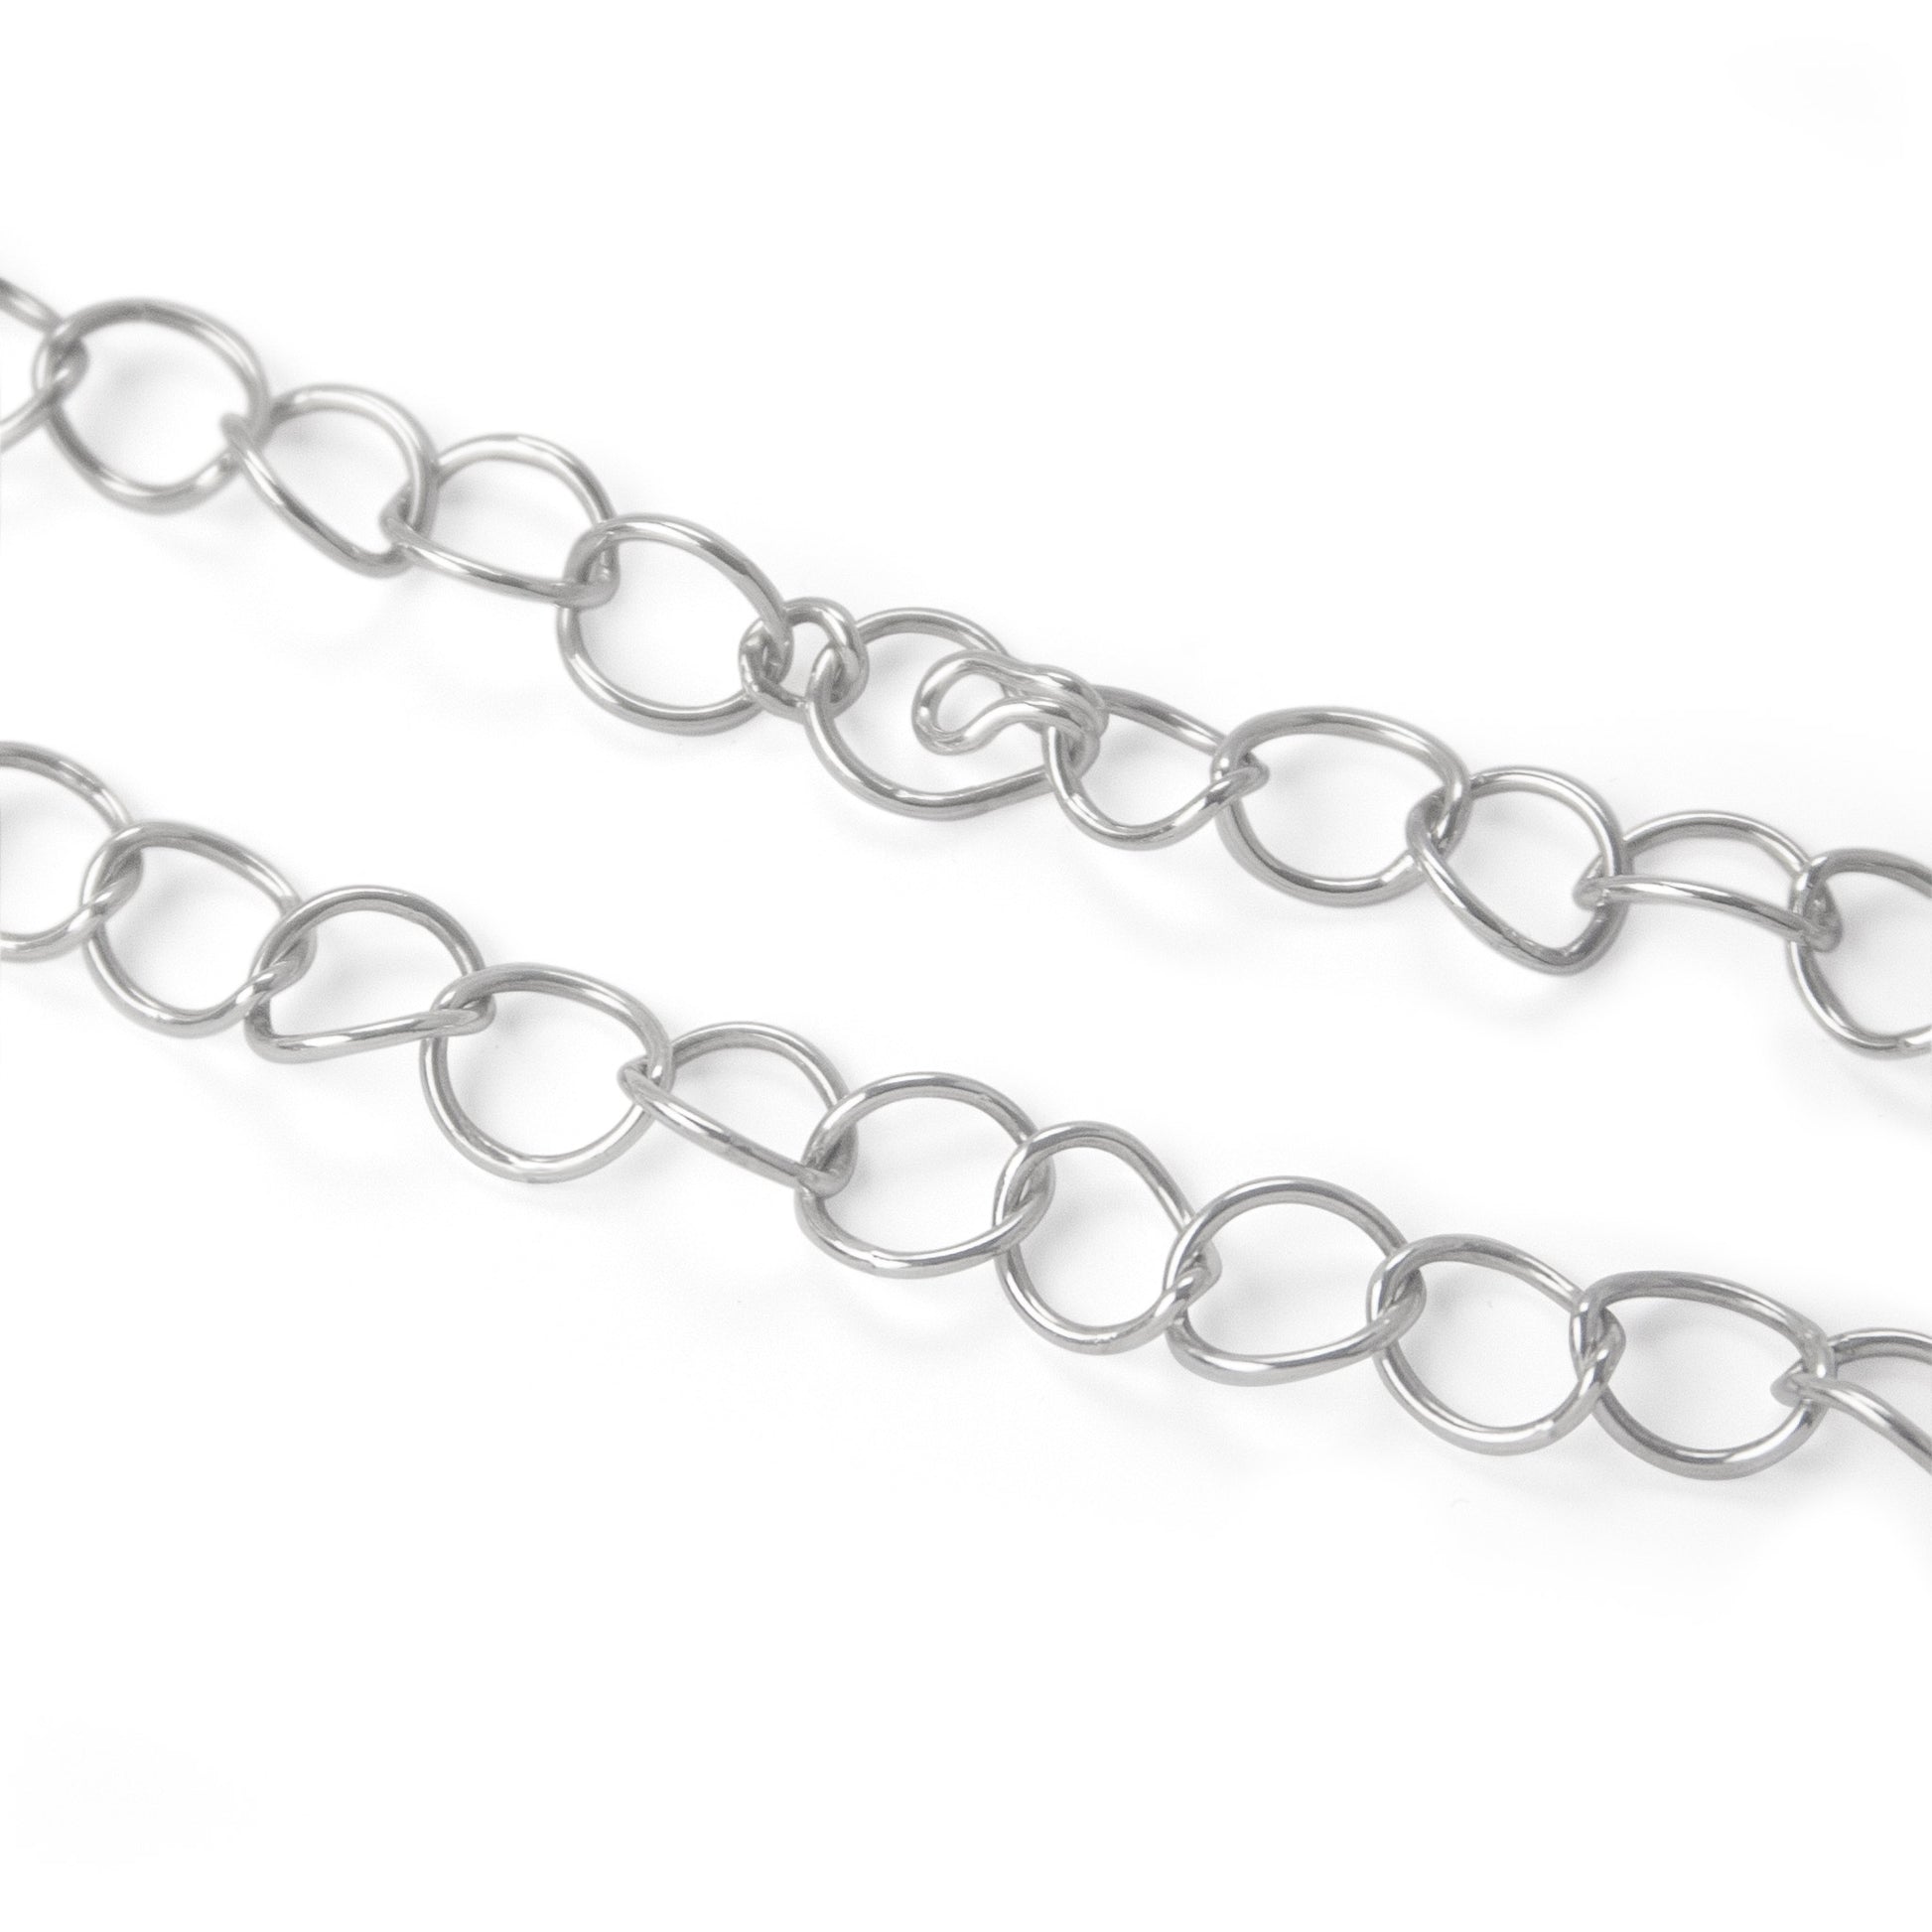 Close up of the fastening on Sliver Loop chain by Katy Luxton Jewellery